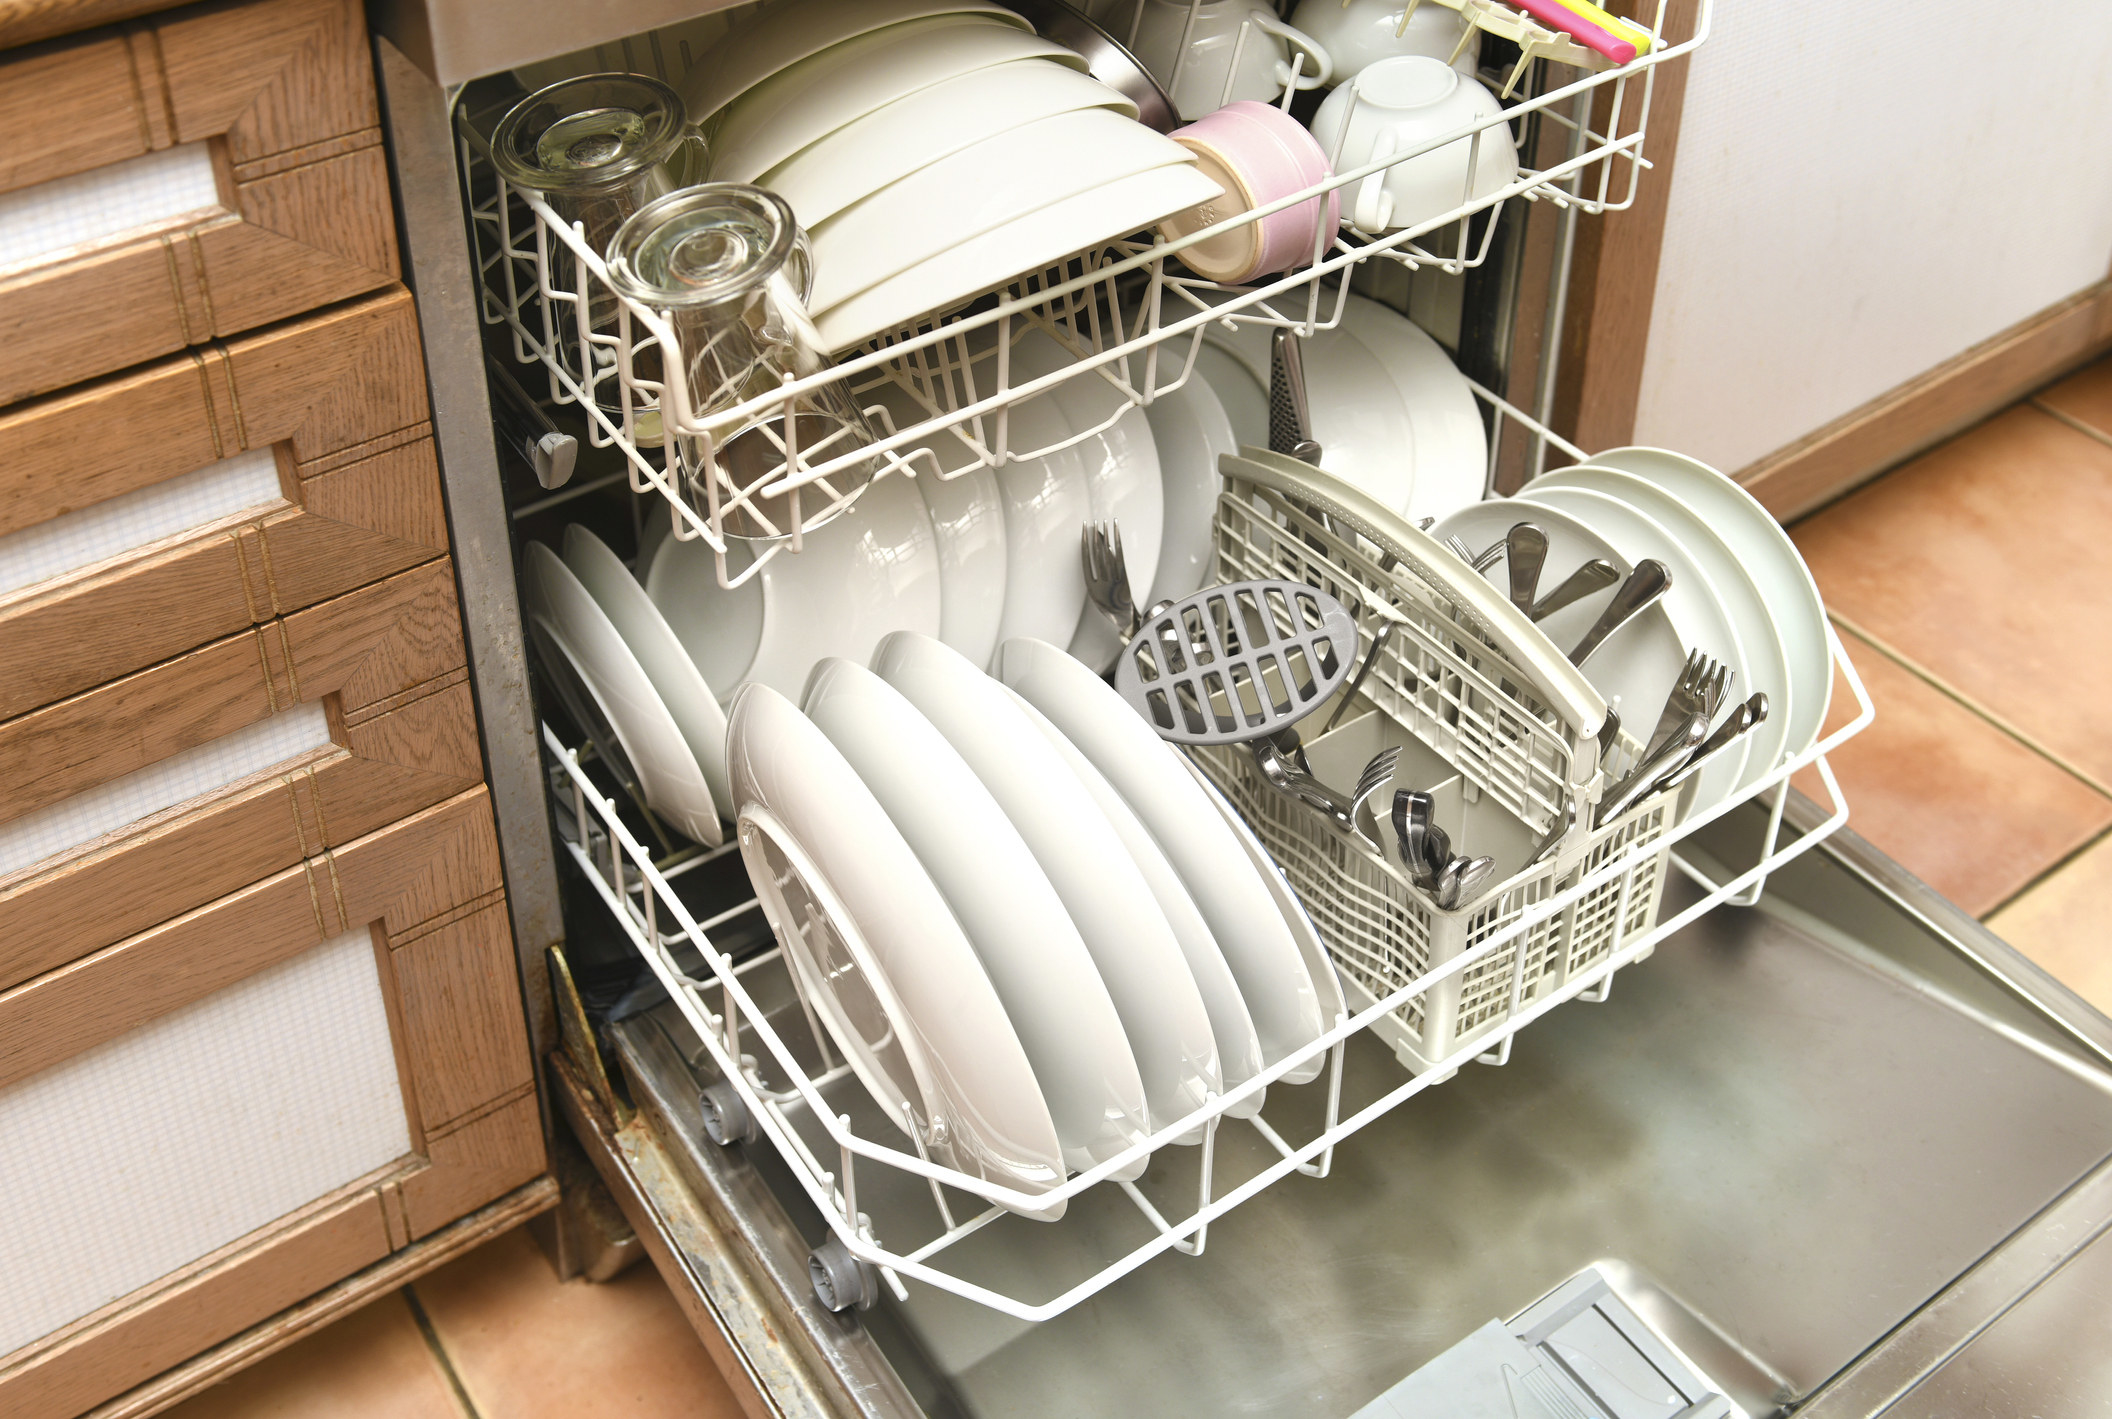 dishes being loaded in the dishwasher